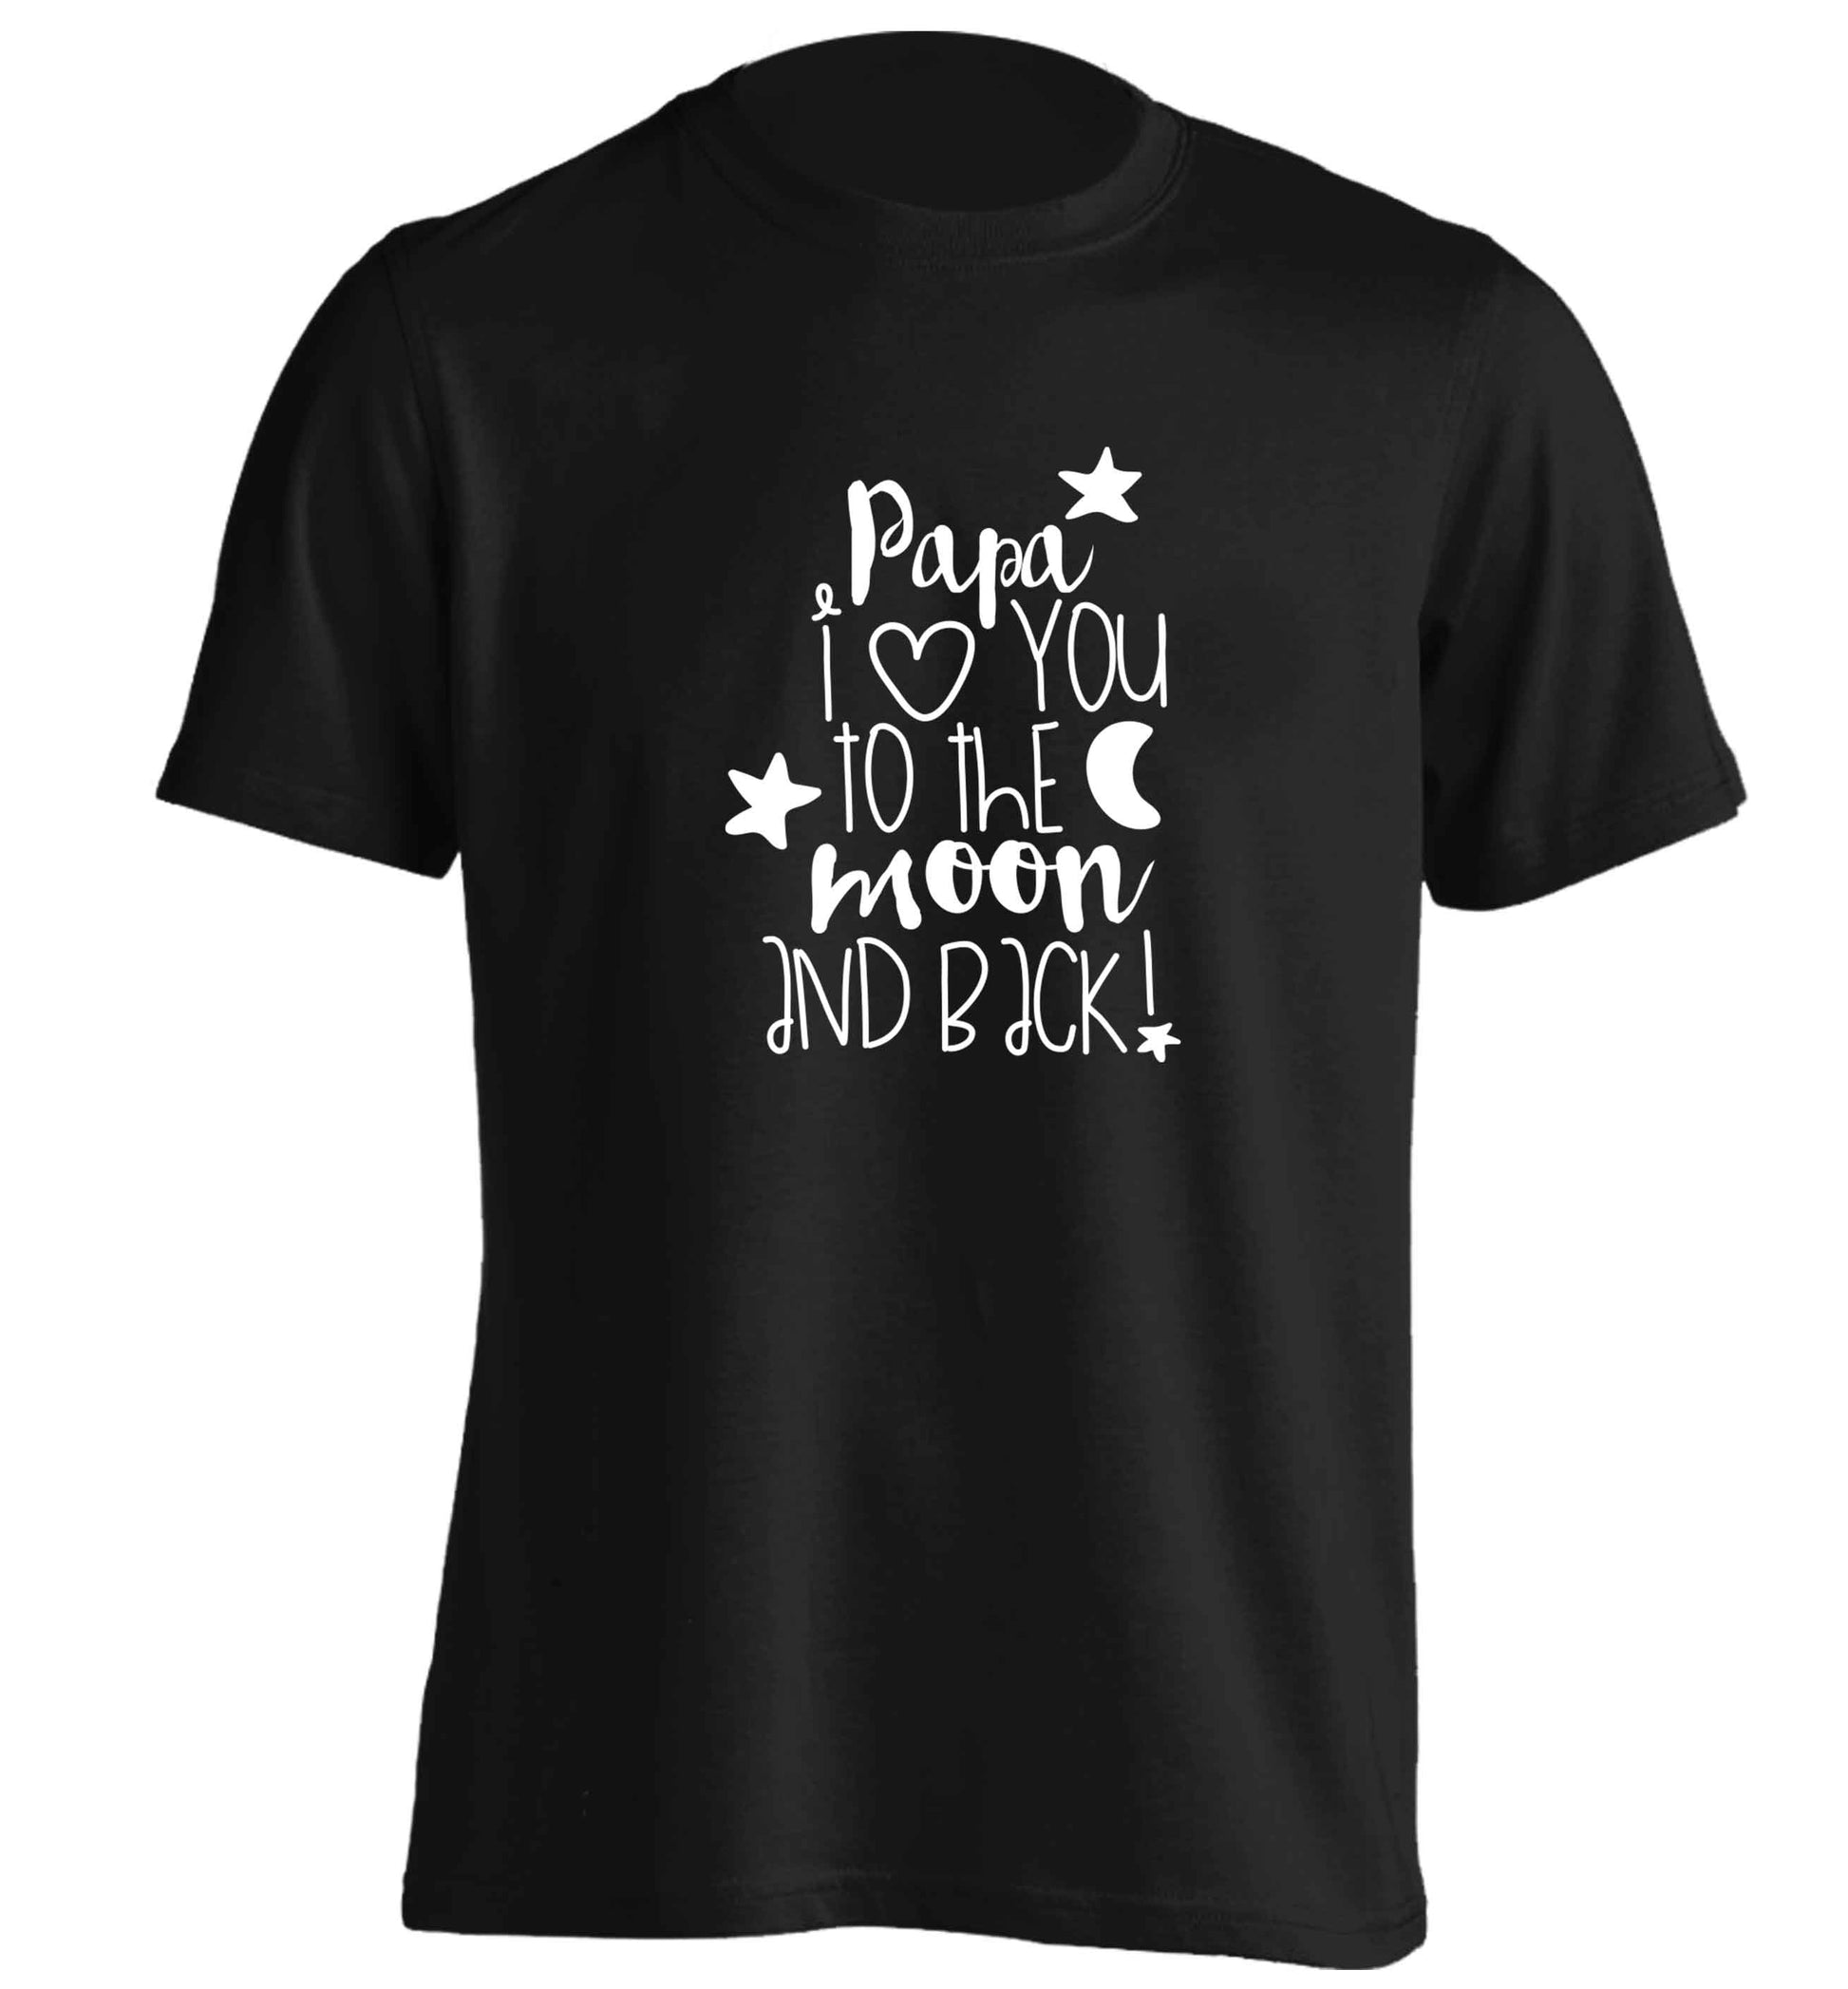 Papa I love you to the moon and back adults unisex black Tshirt 2XL